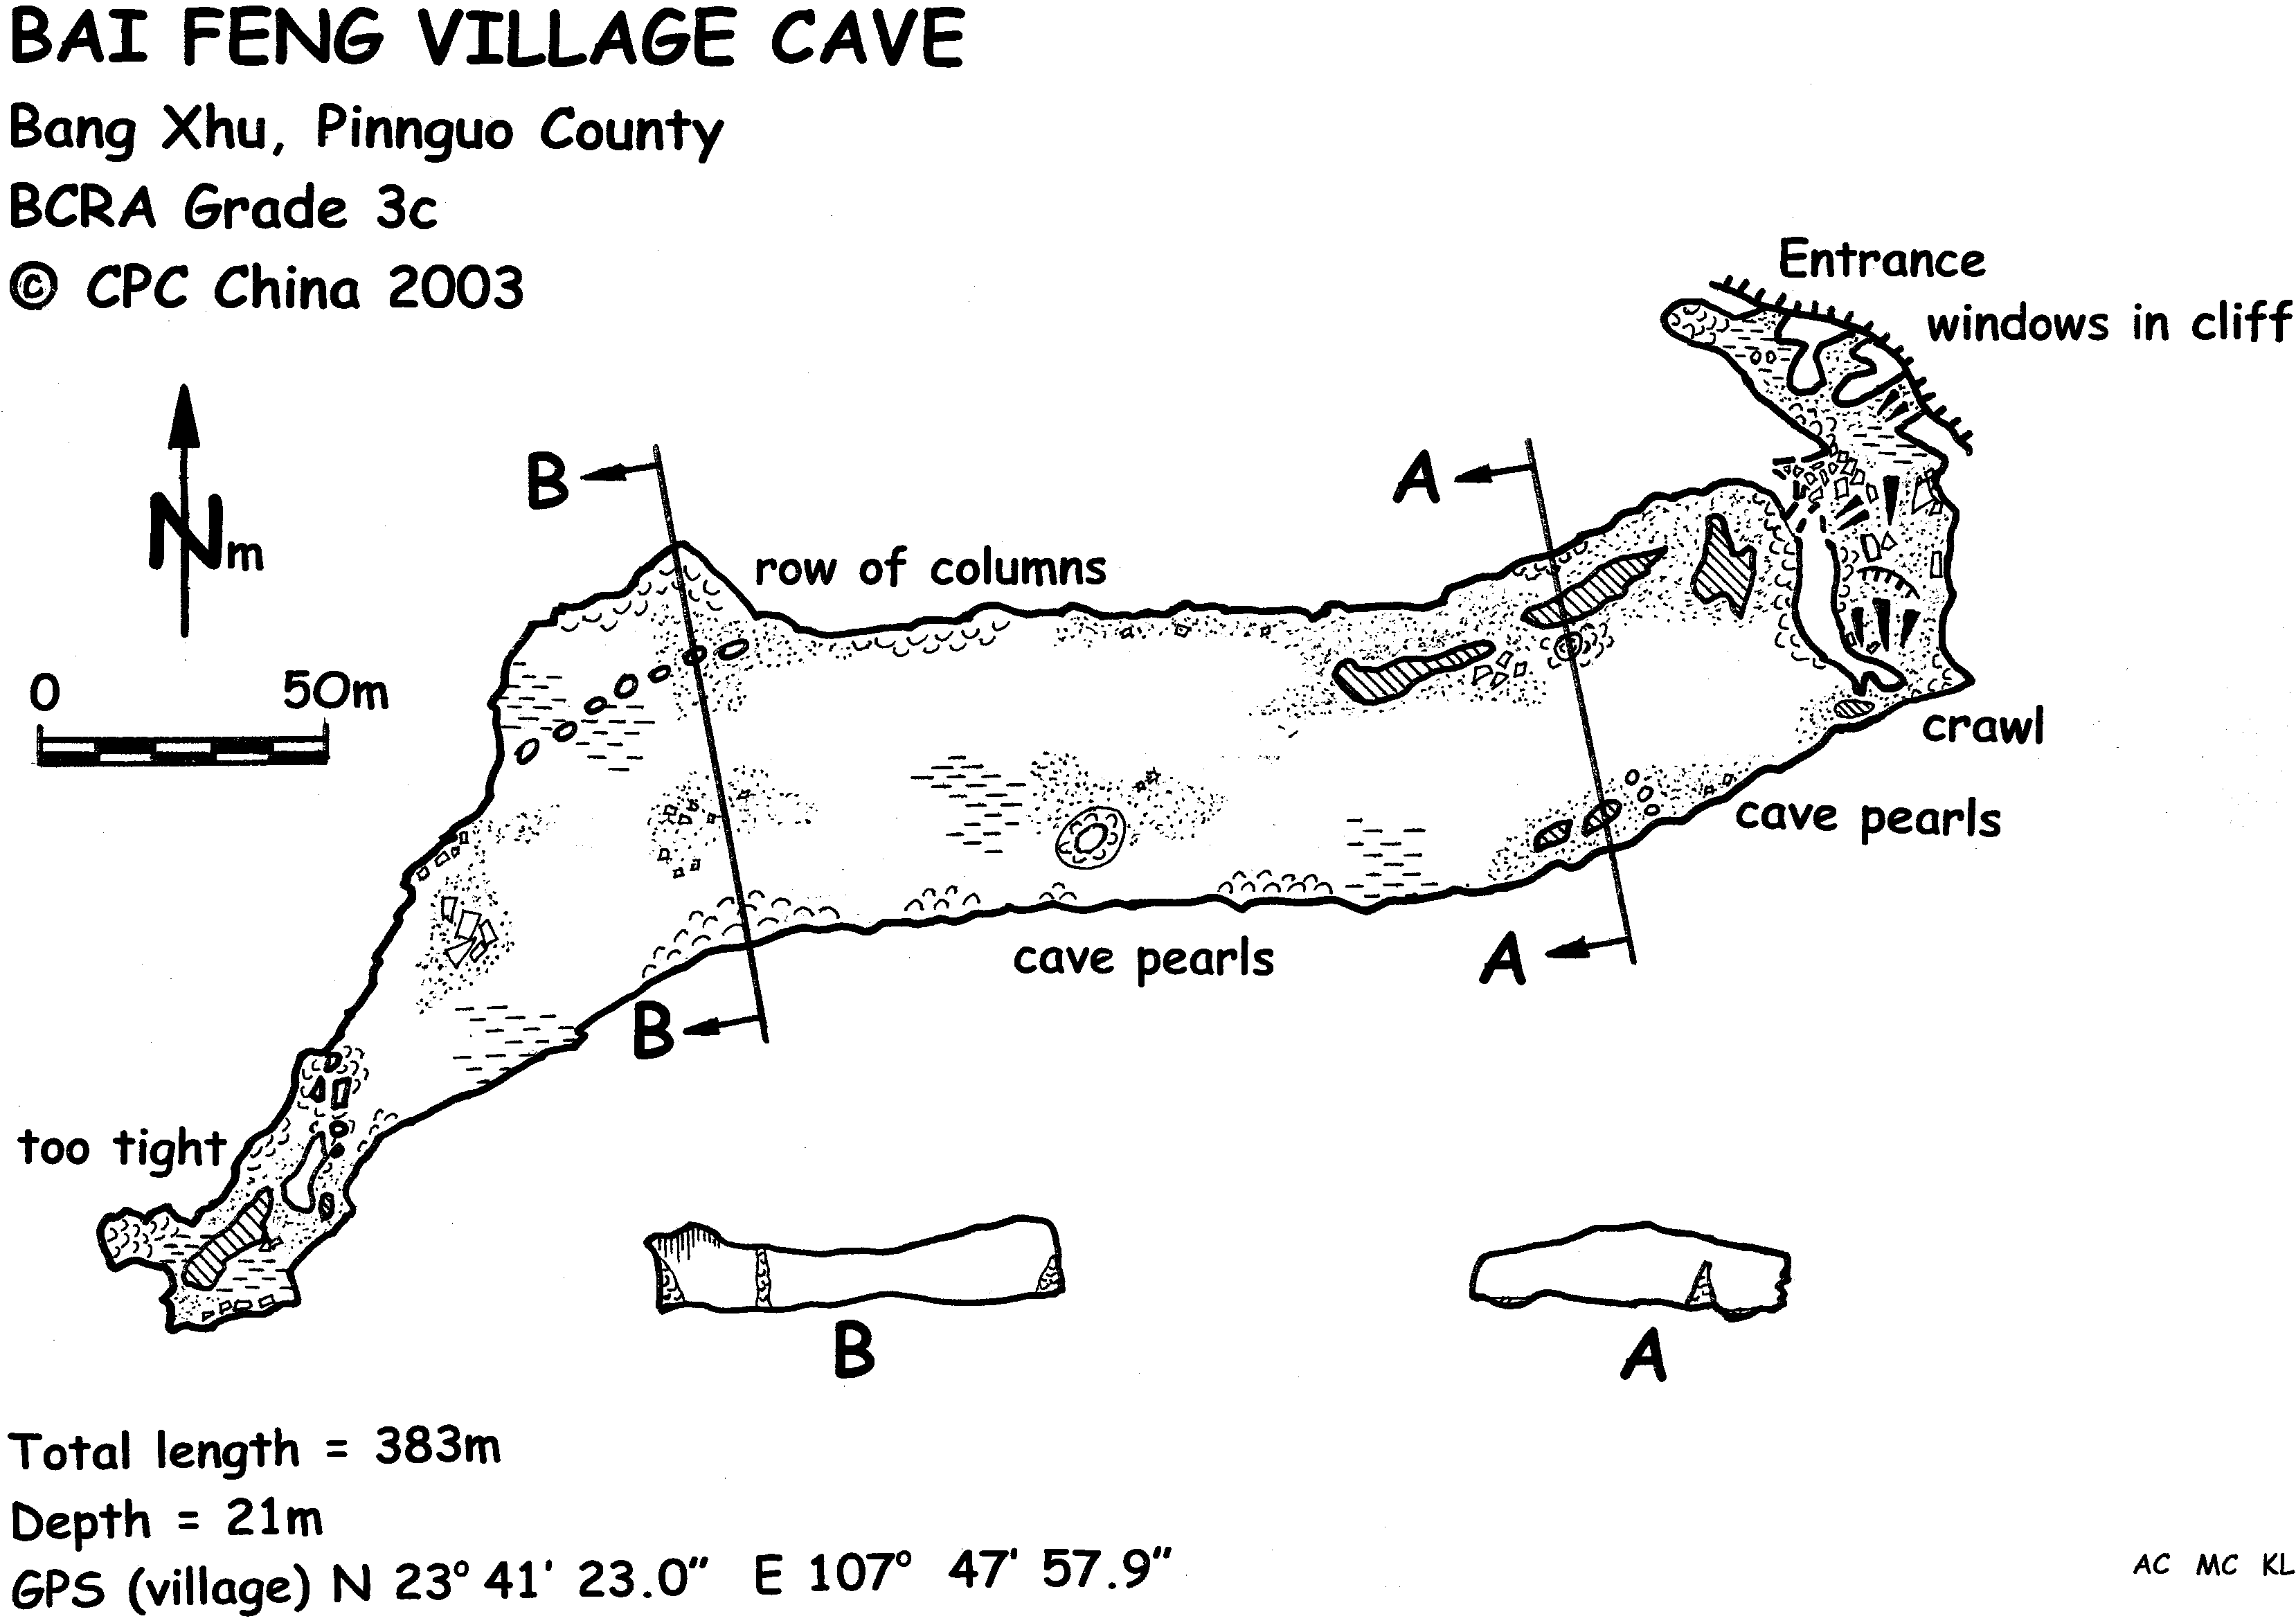 topographie Baifeng village cave 